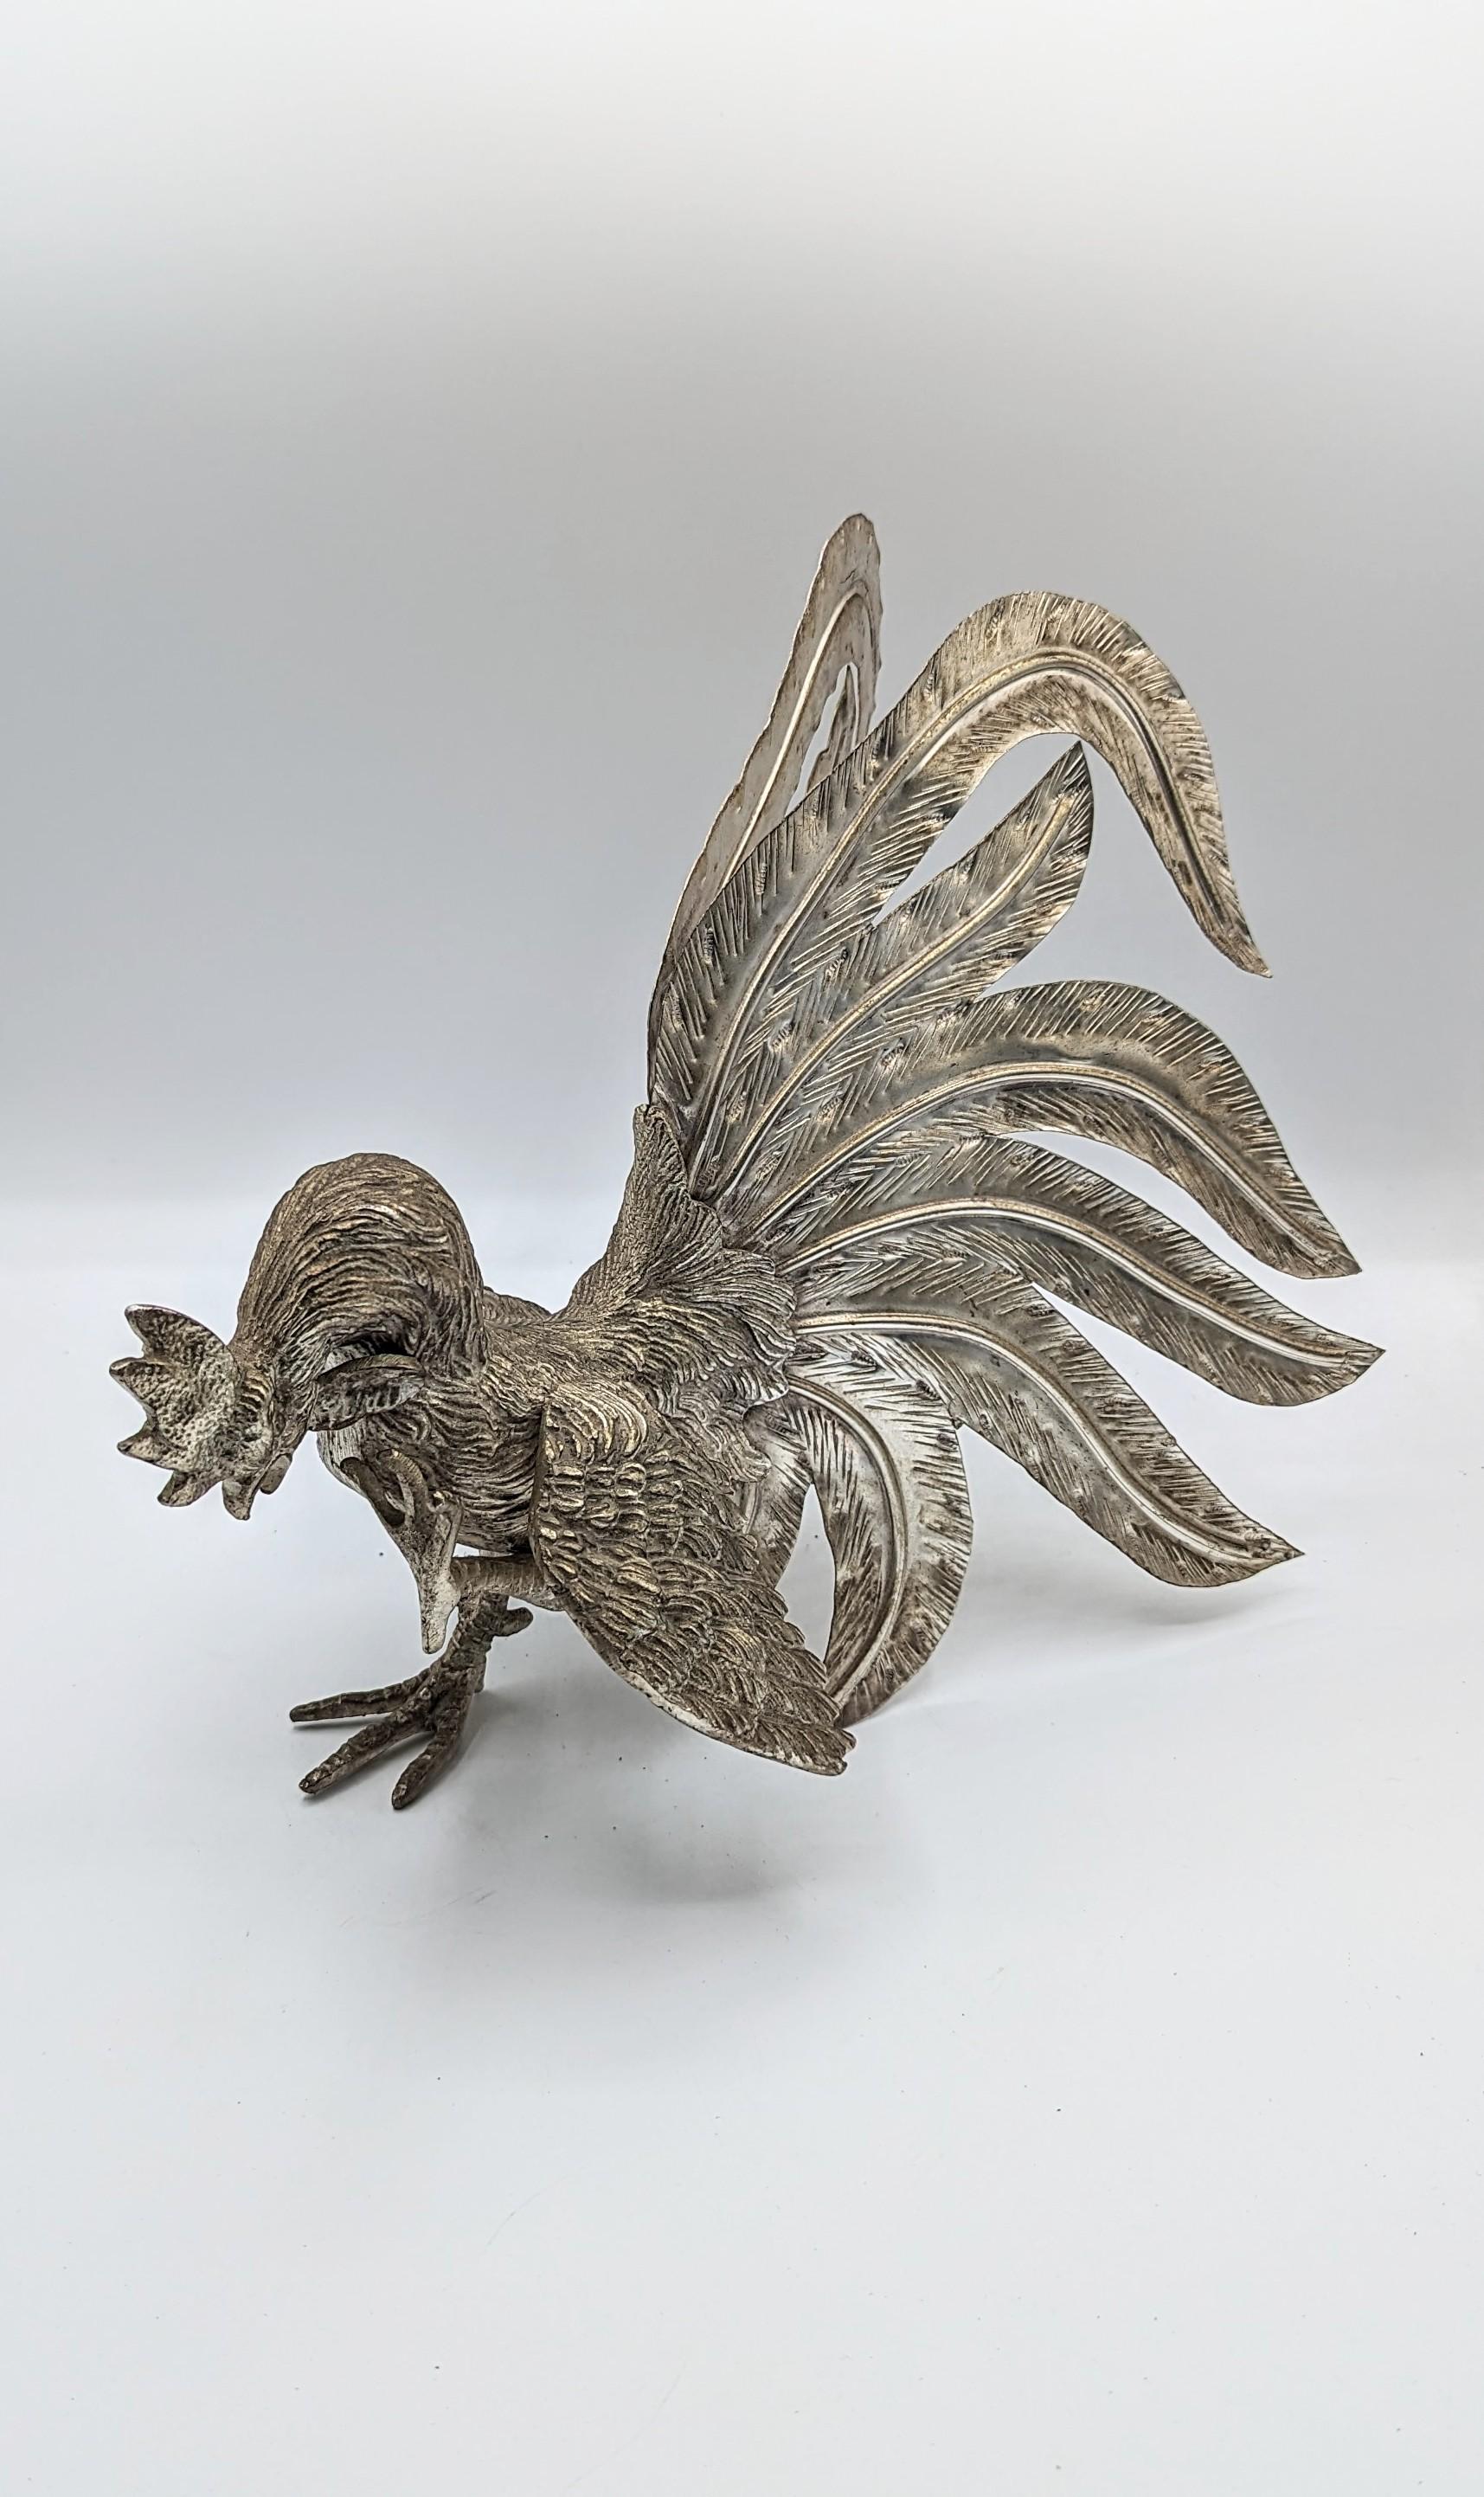 Rare and beautiful large silver plate roosters manufactured in France in 1960s.
Roosters in an attitude of fighting. These Fighting Cockerels are created with a wonderful attention to detail with close attention paid to the feathers and plumage.